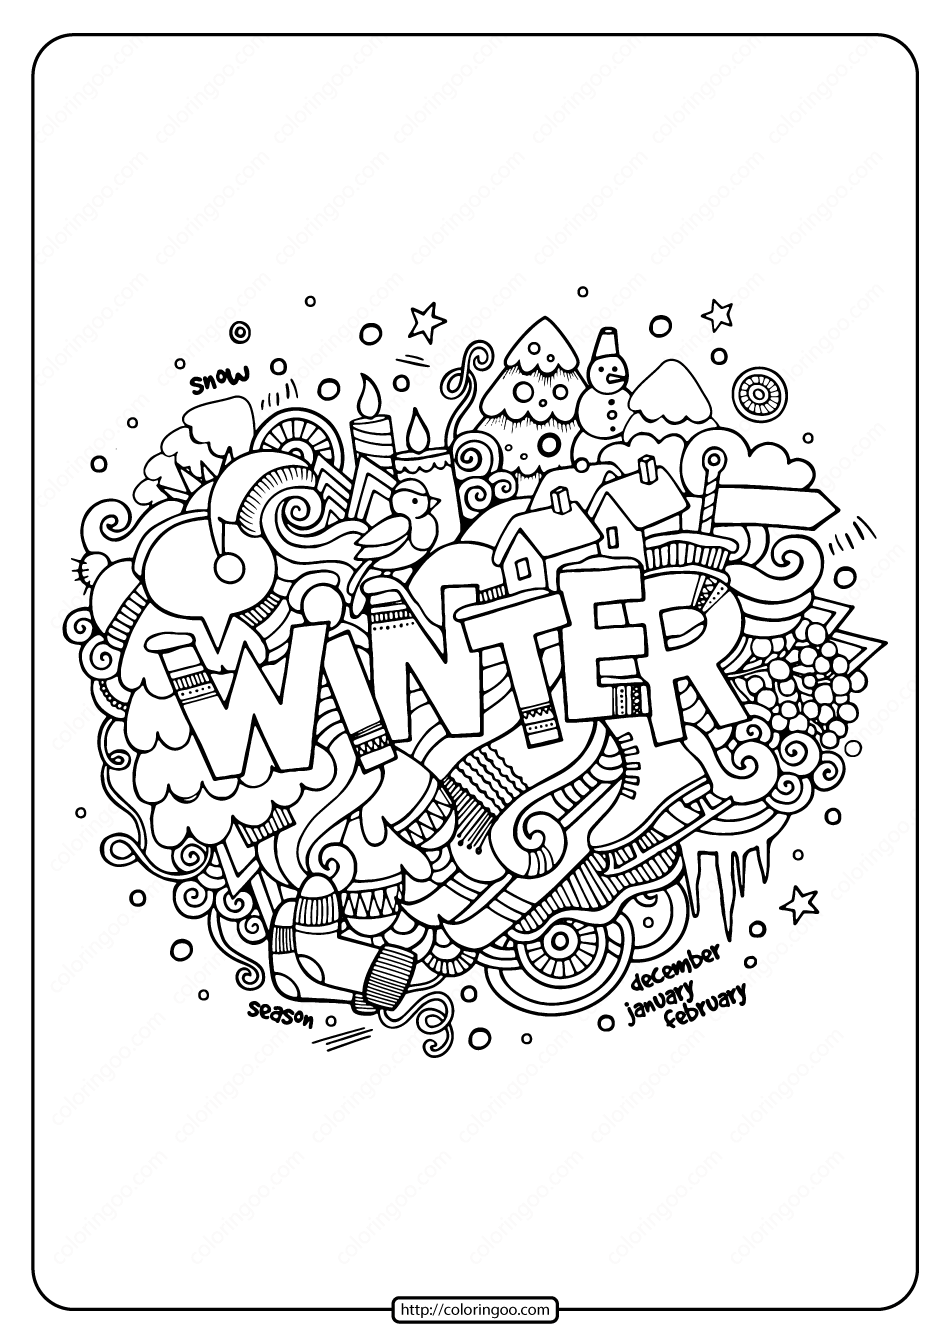 winter coloring pages simple | christmas coloring pages for adults pdf free | nightmare before christmas coloring pages for adults